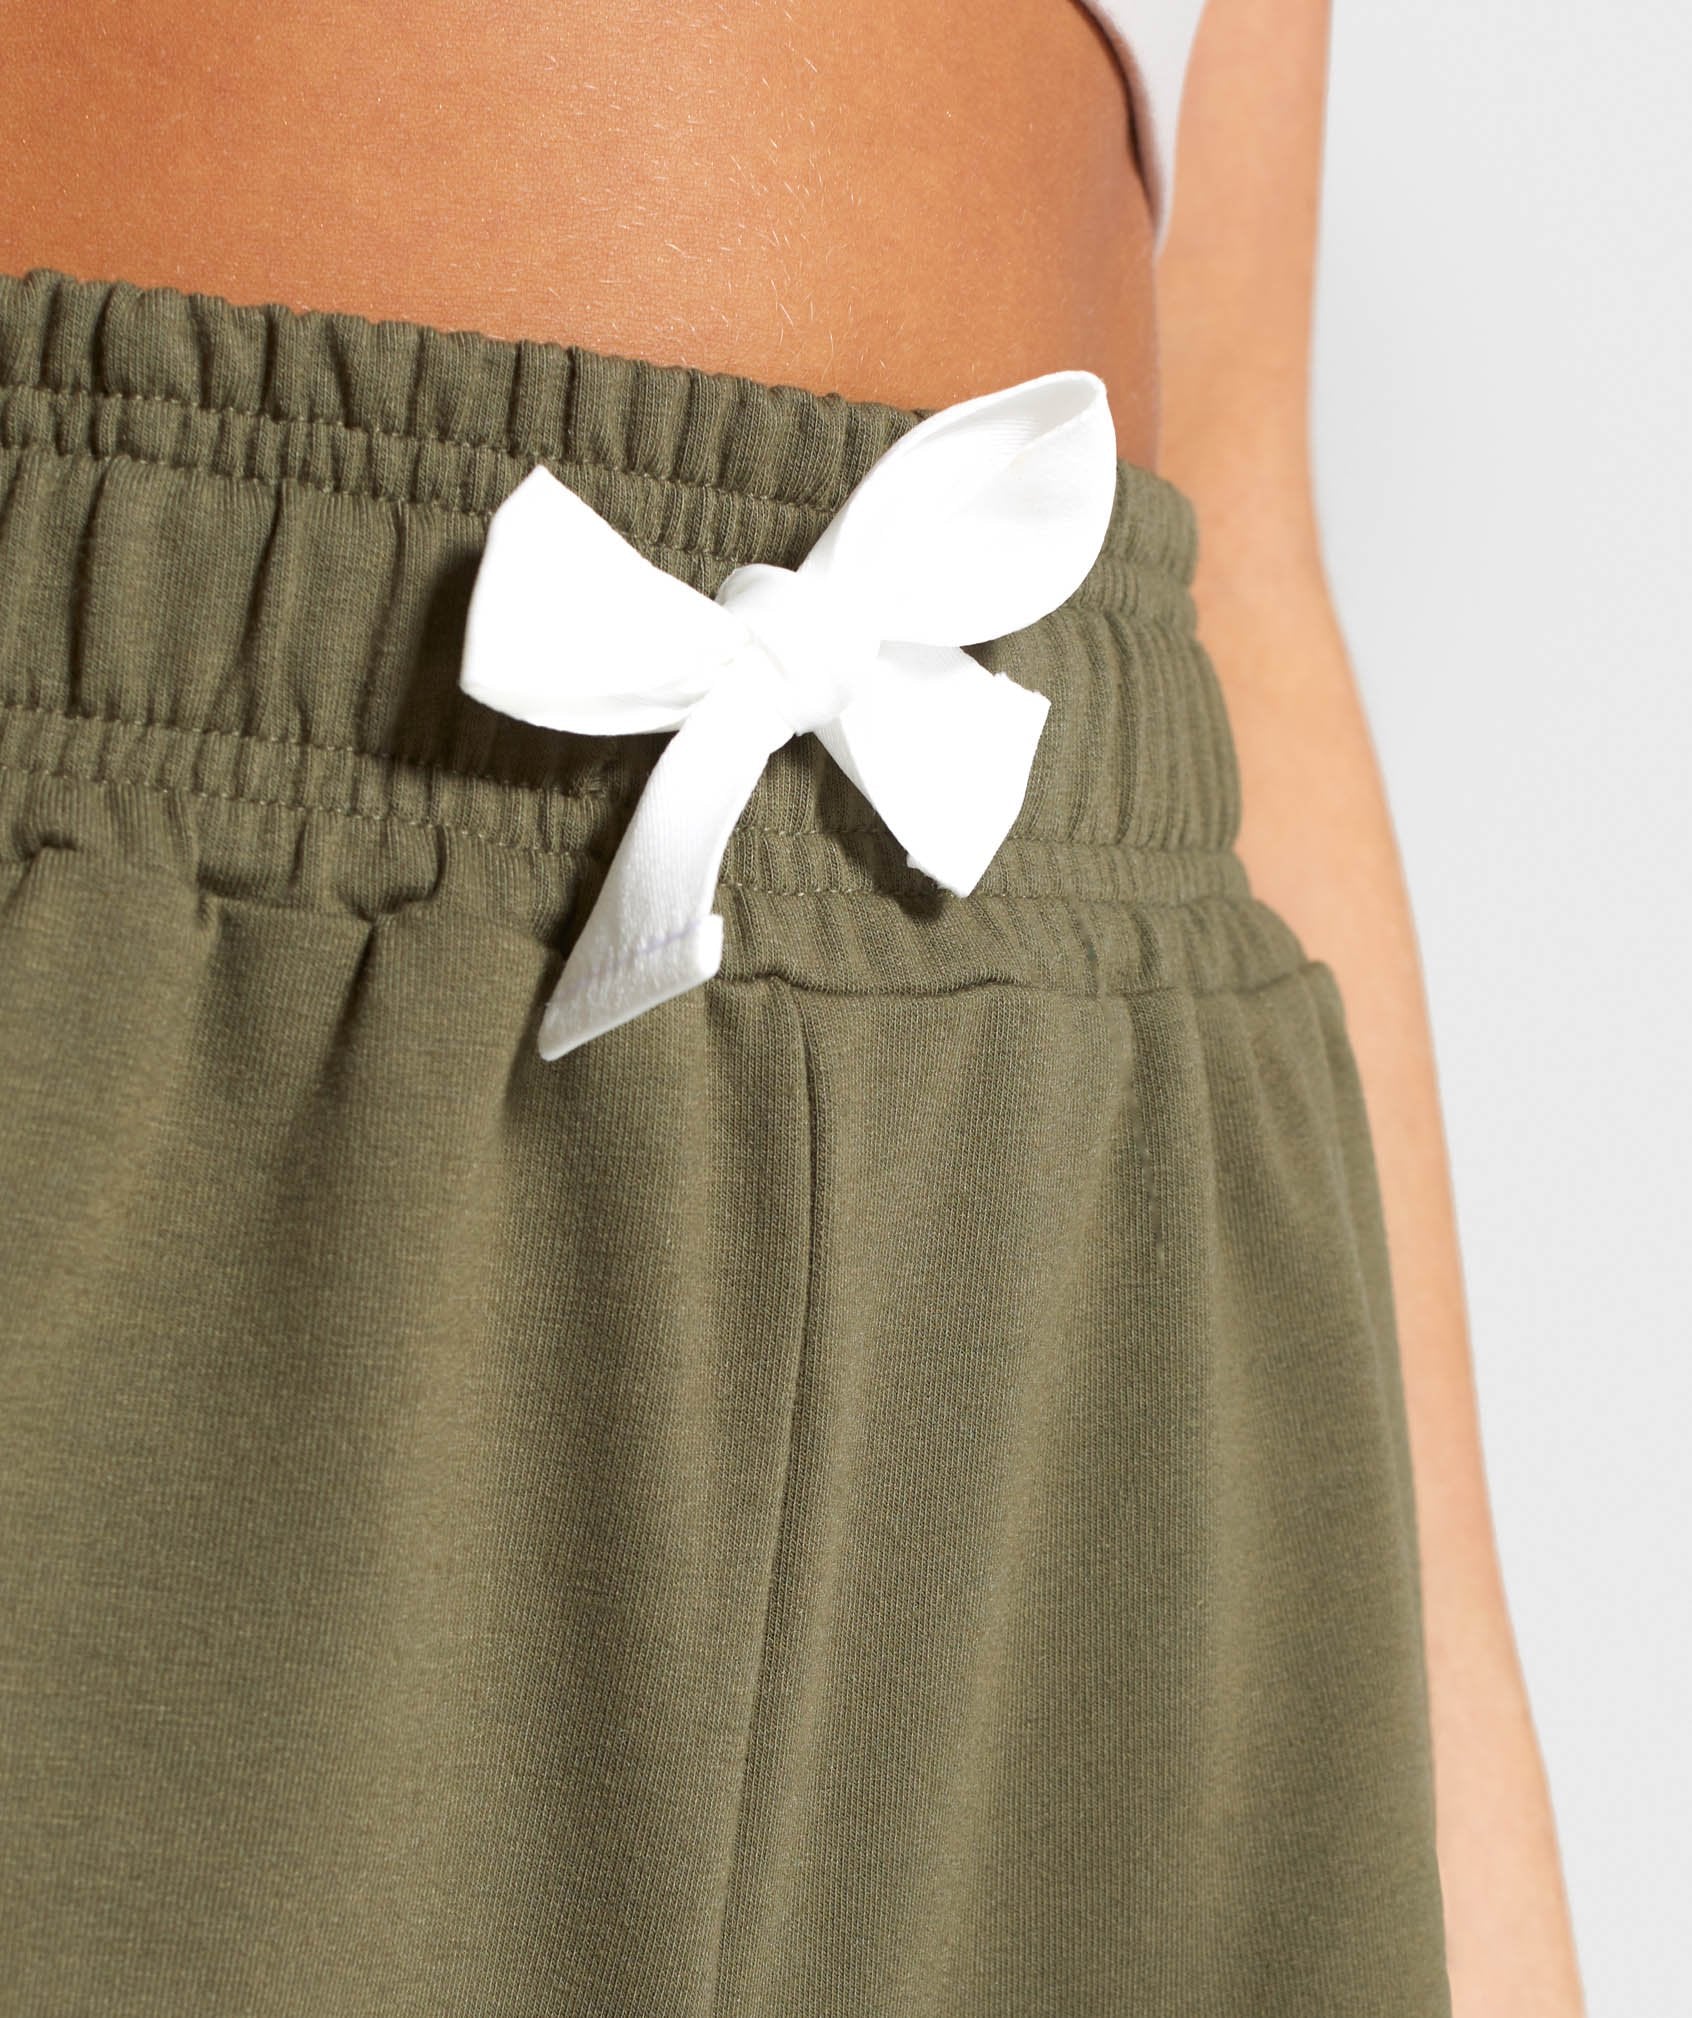 Ark High Waisted Shorts in Khaki - view 6